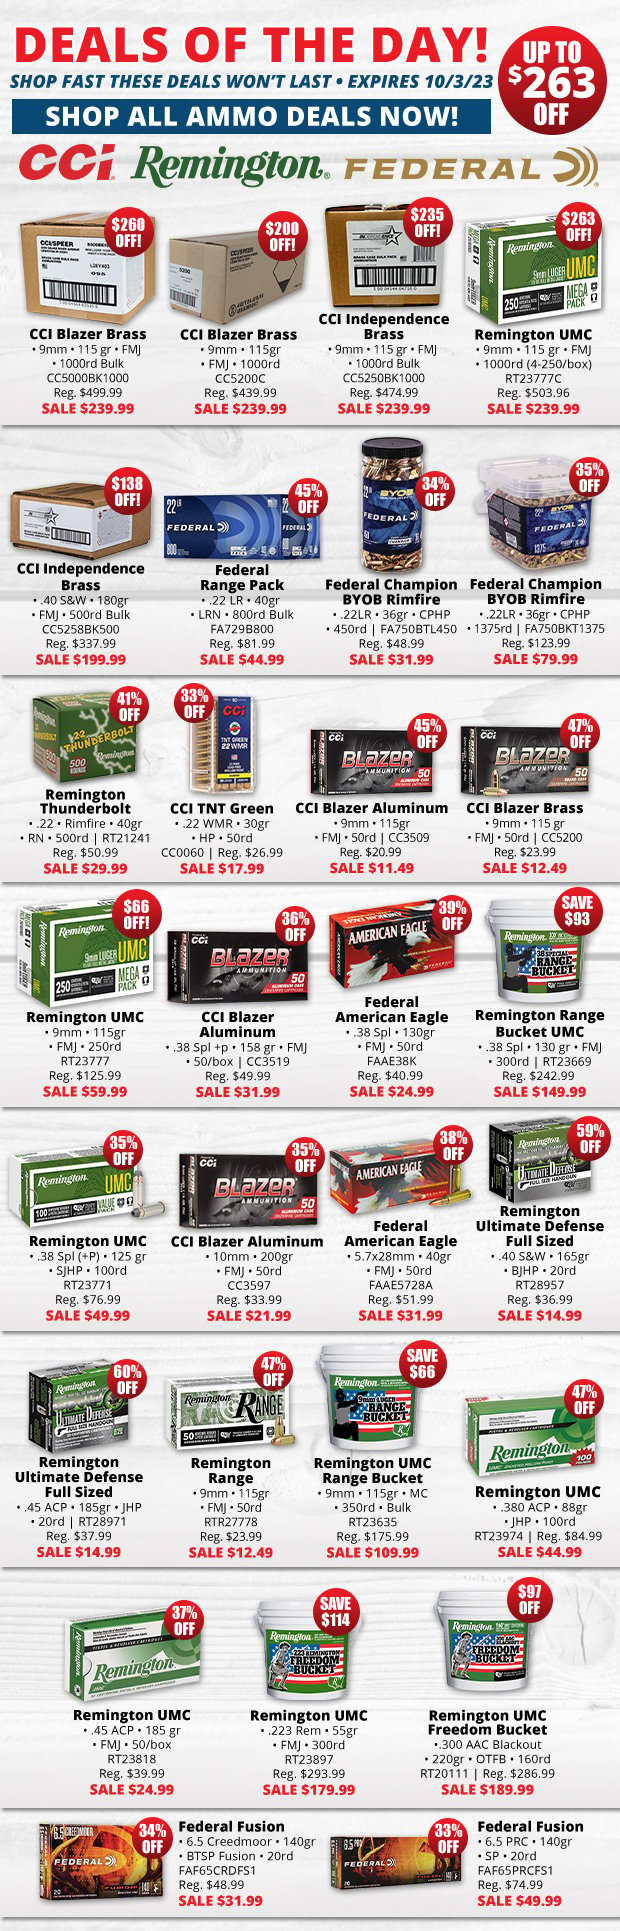 Up to $263 in Savings for Ammo Deals of the Day